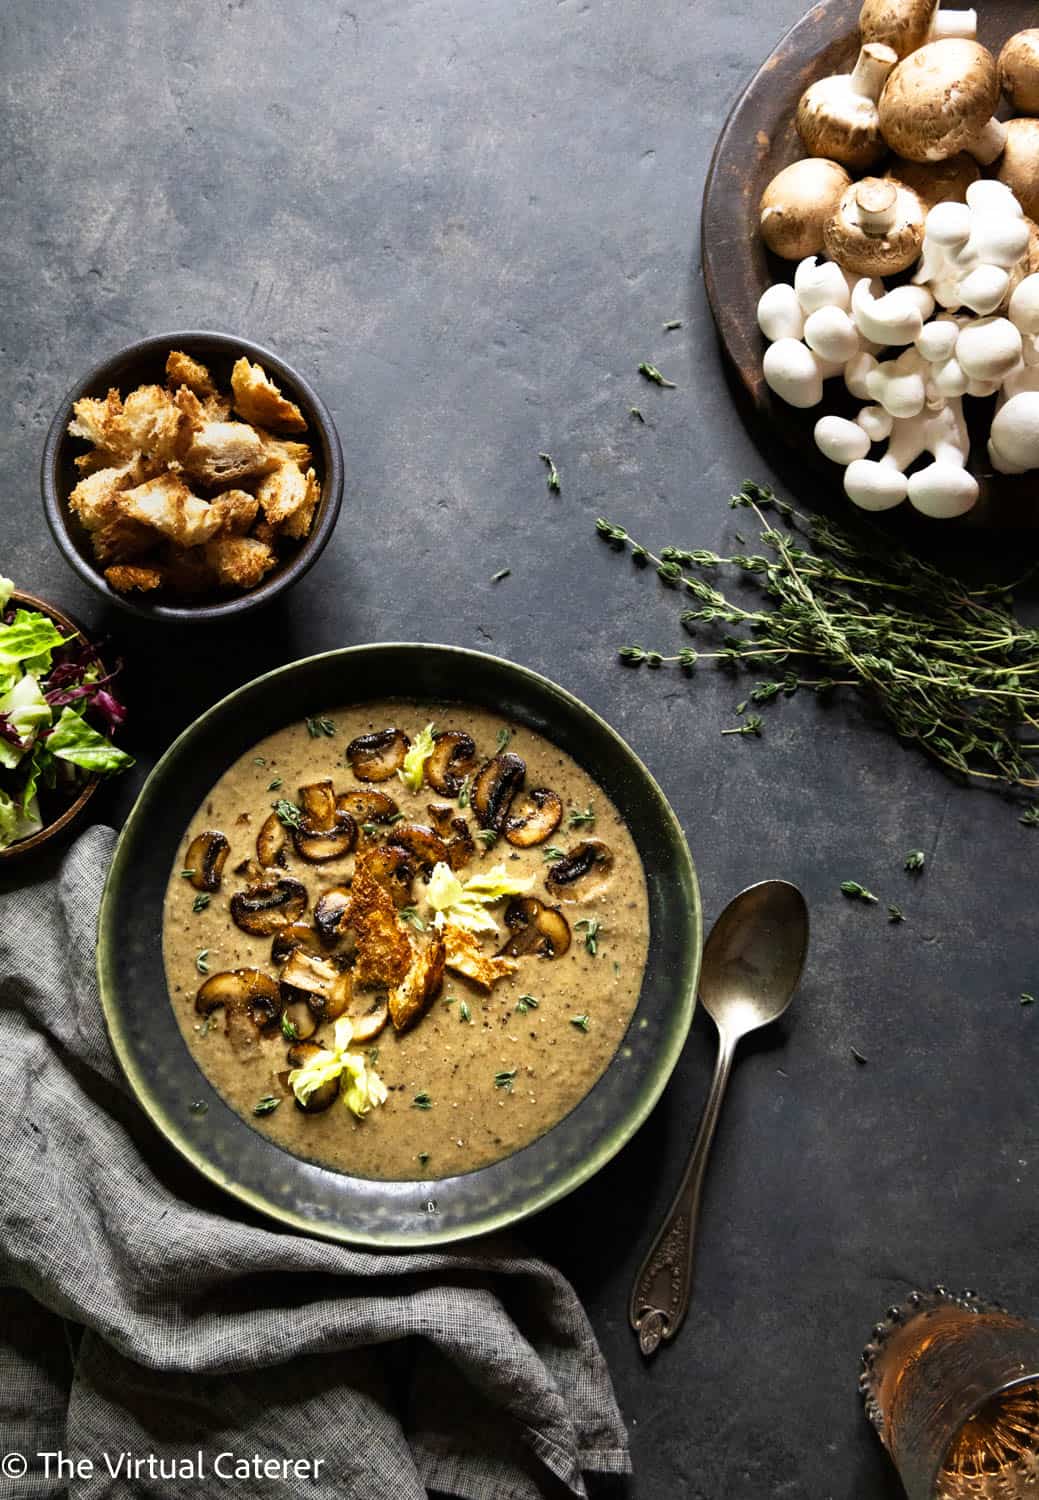 Soup in a green bowl with sauteed mushrooms, croutons, and thyme on a dark background.